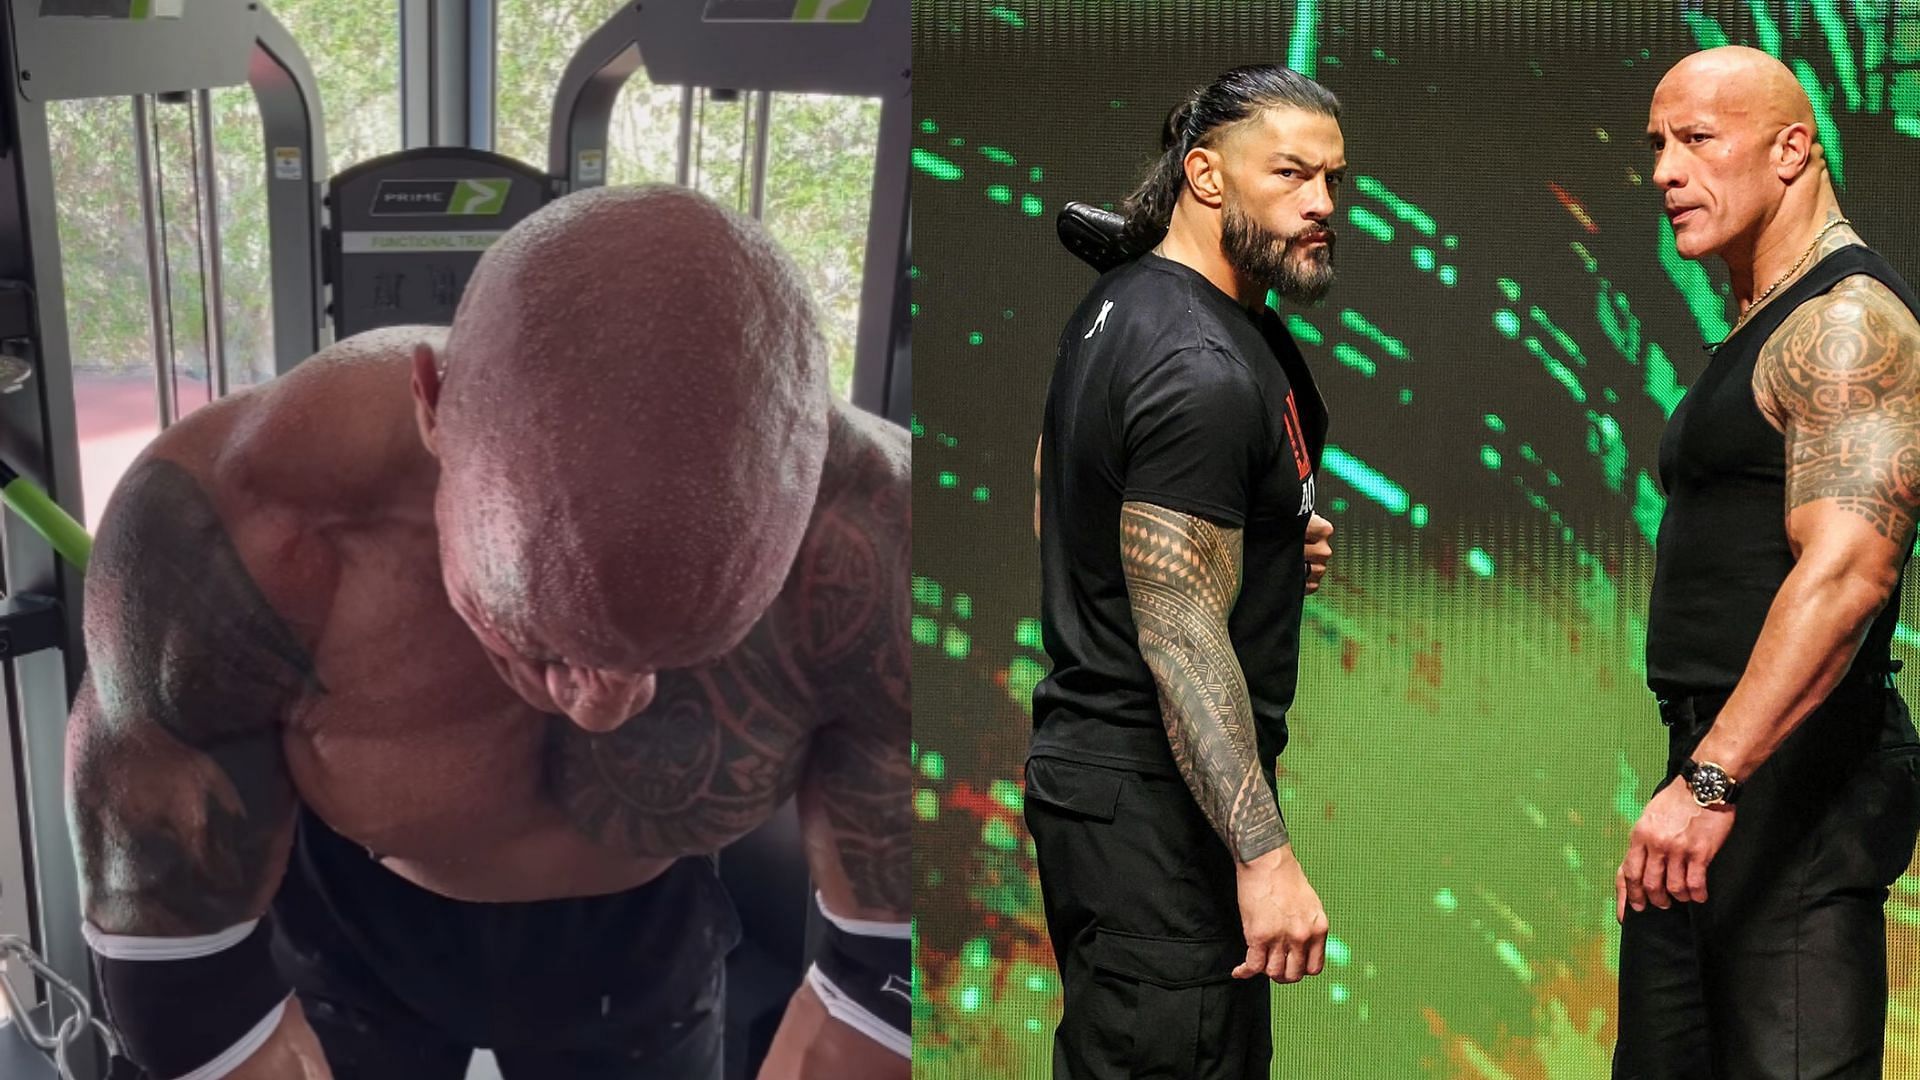 The Rock had something to say before WWE RAW